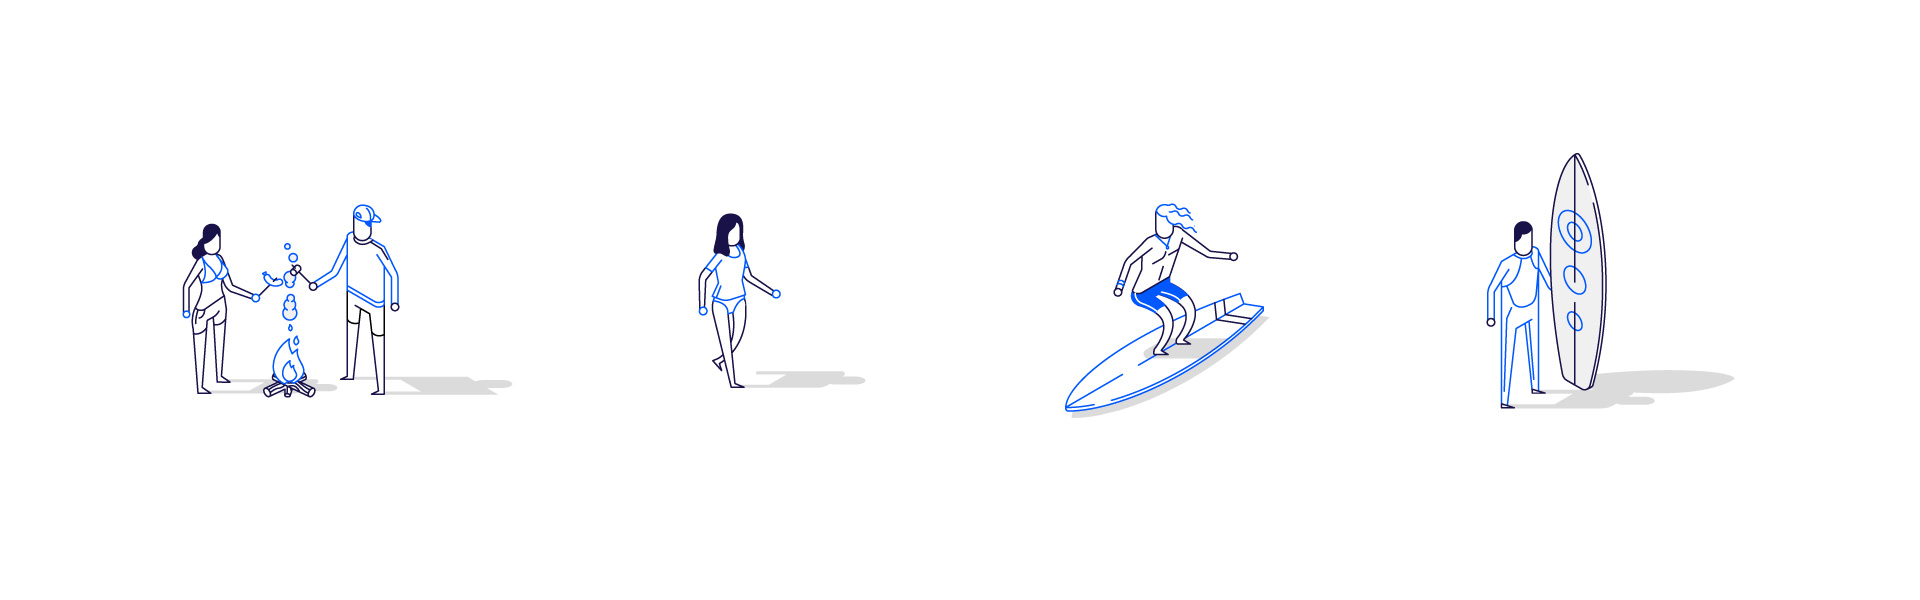 Illustration of a couple cooking on a campfire and two surfers